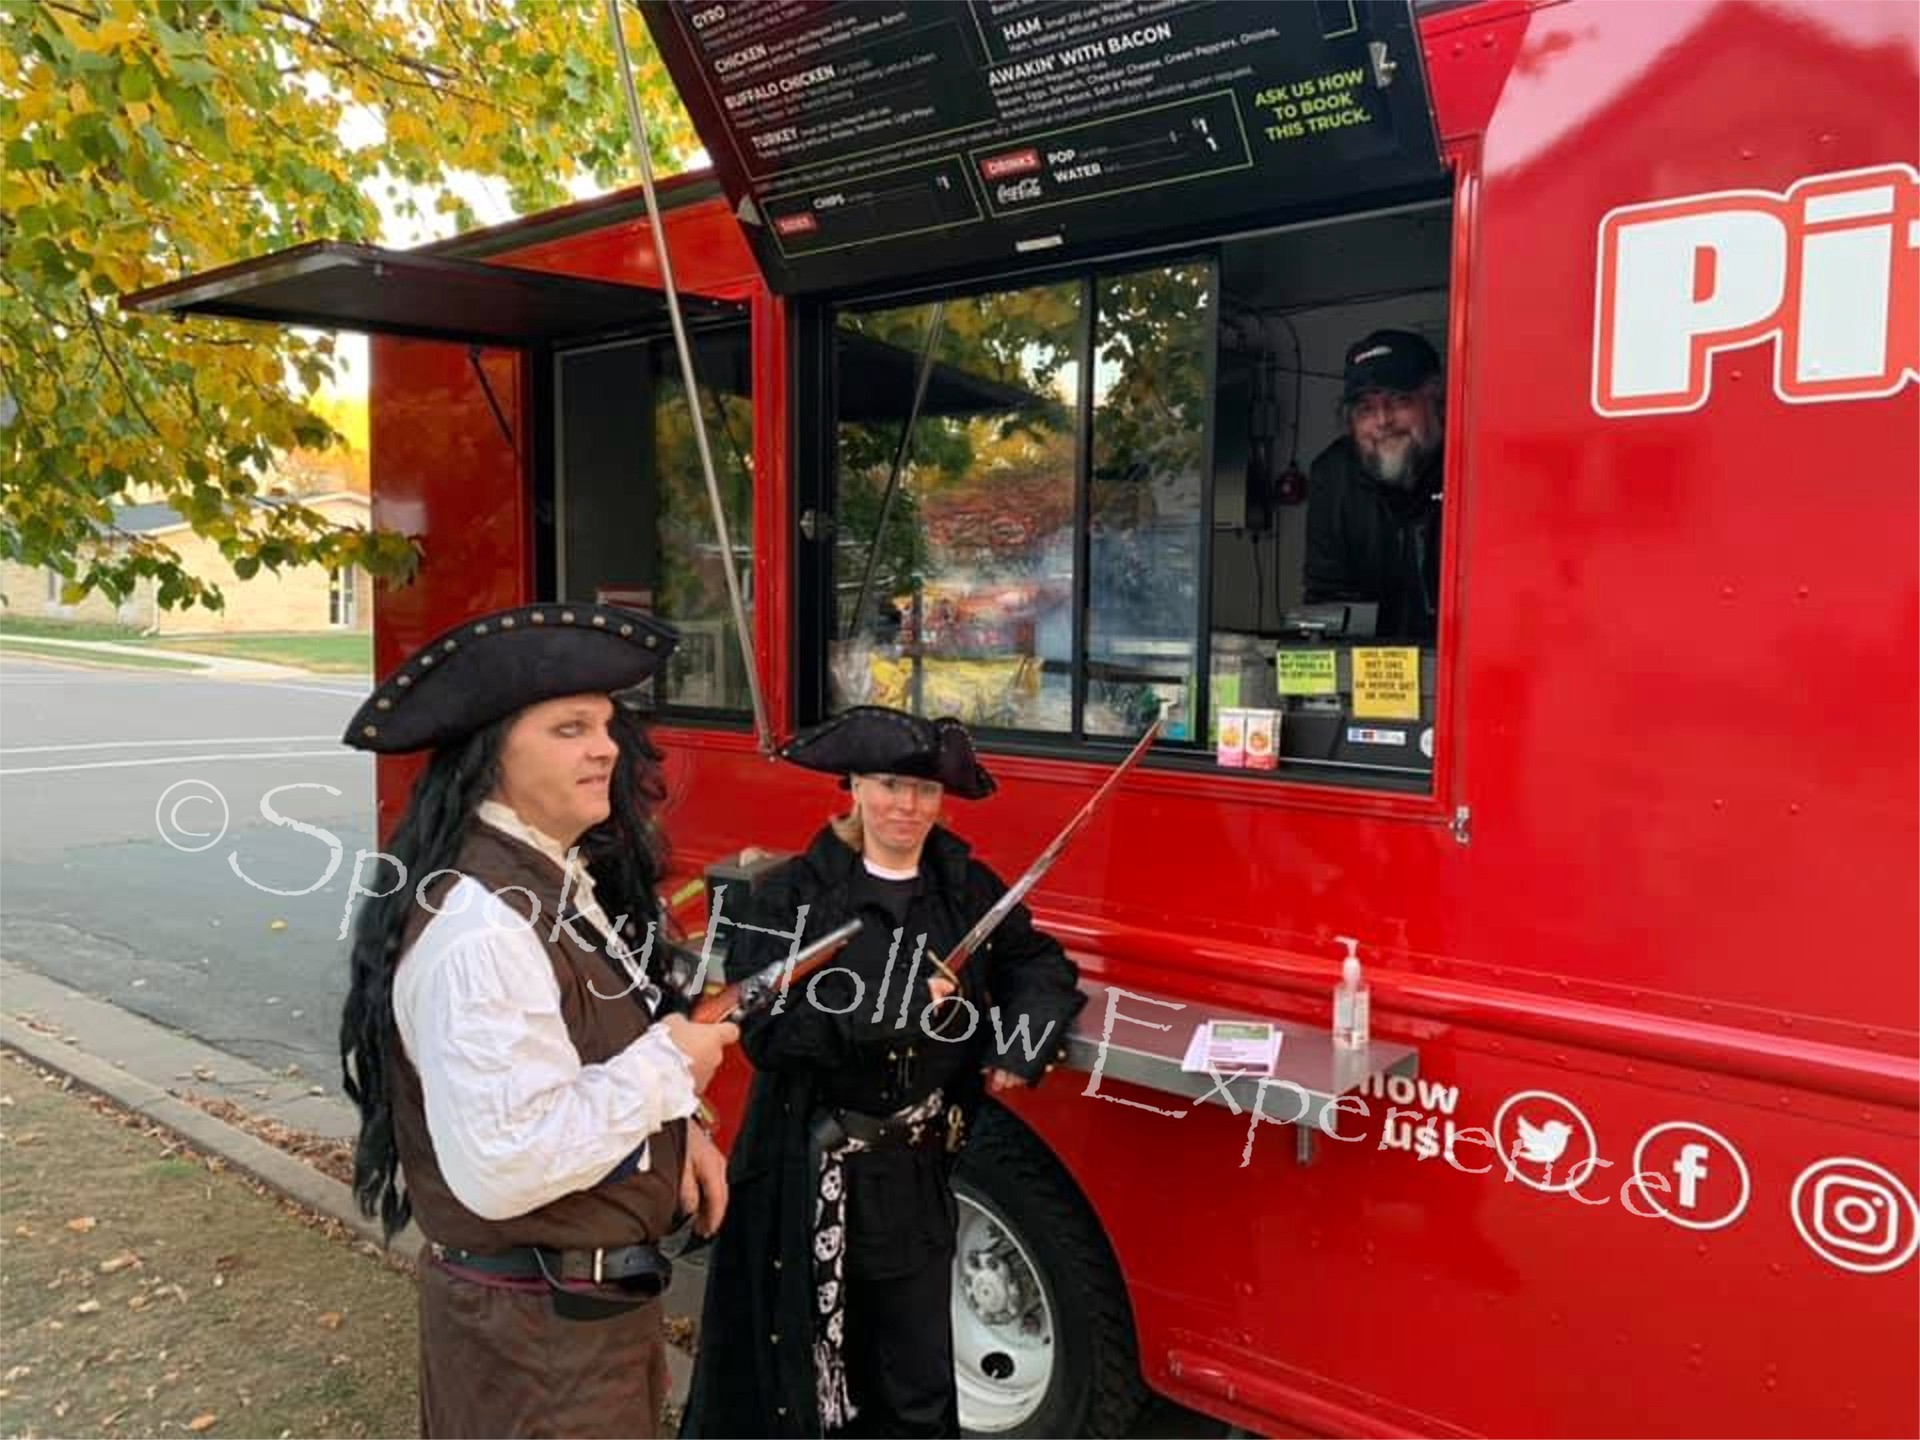 Spooky Hollow Experience copyright food truck pita pit